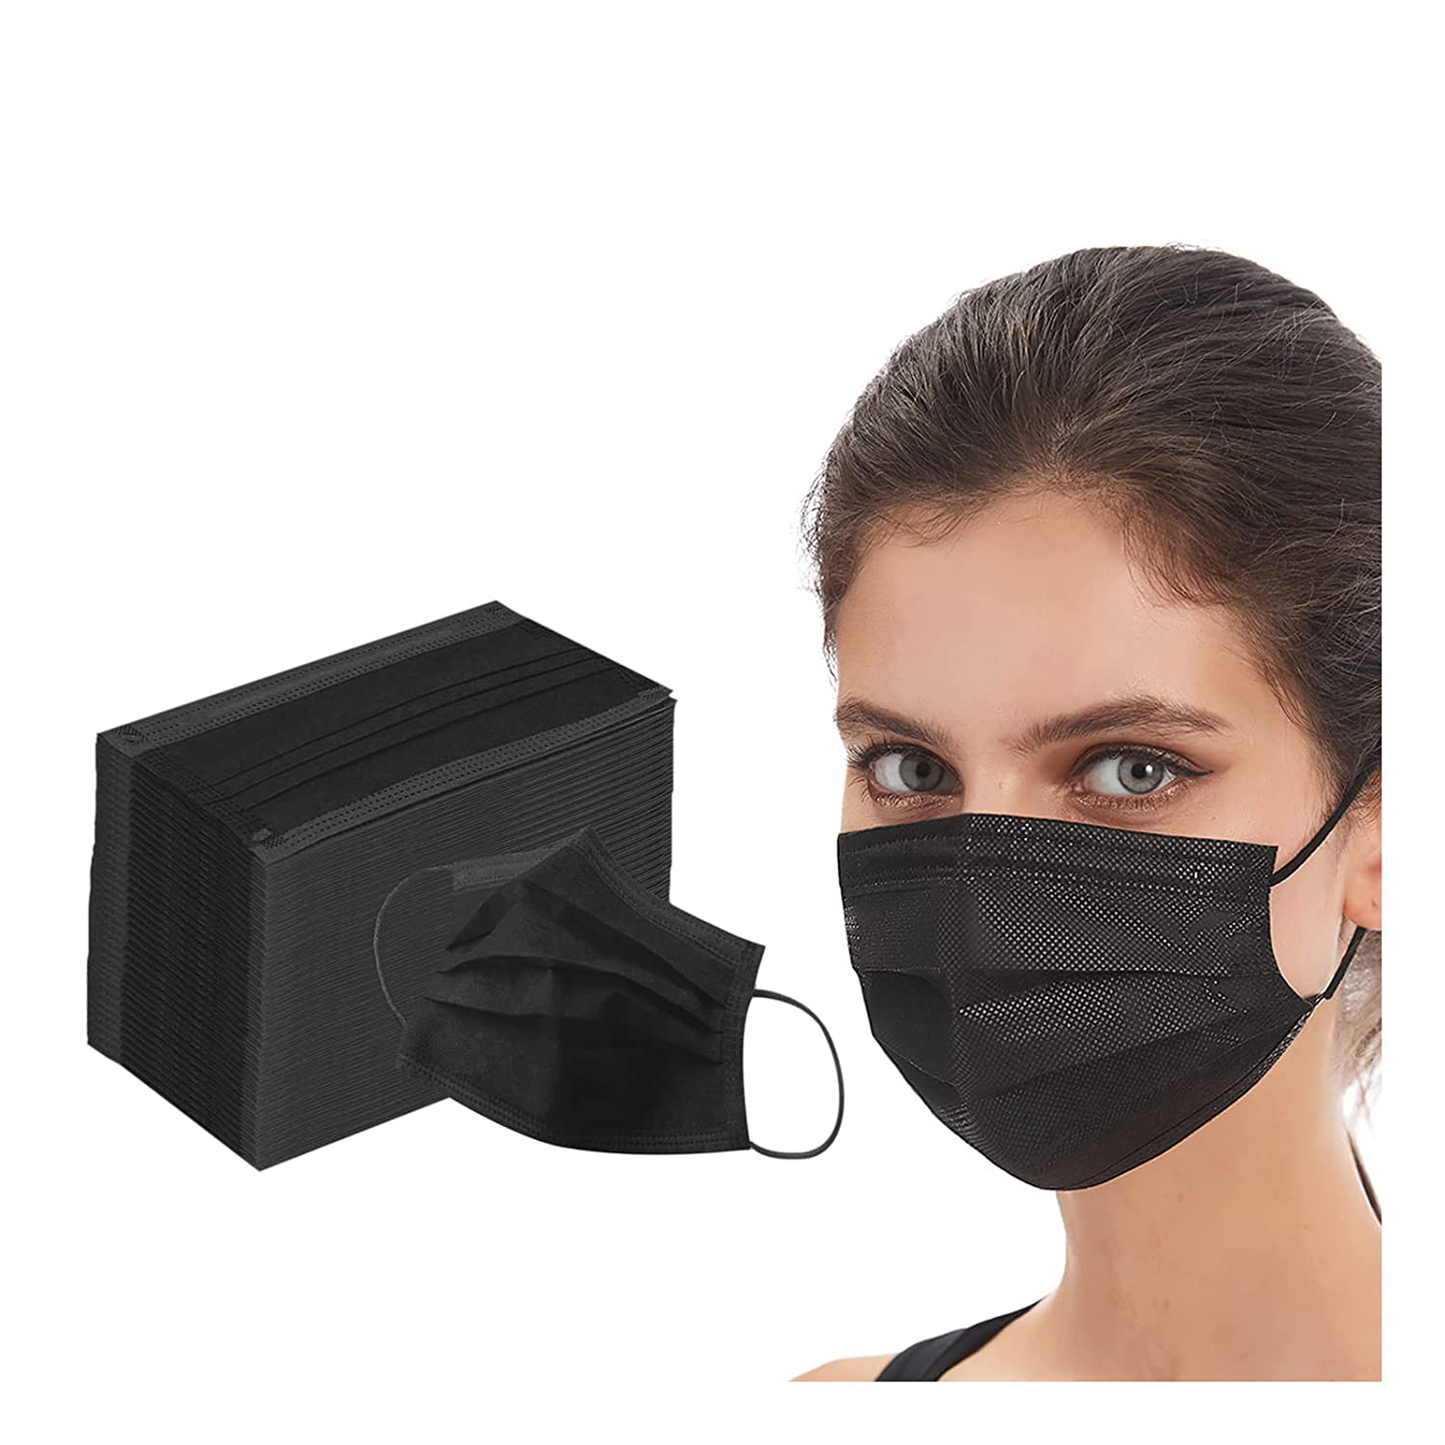 100Pcs Adult Disposable Face Masks 3 Layer Non-Woven Masks with Soft Elastic Earloop